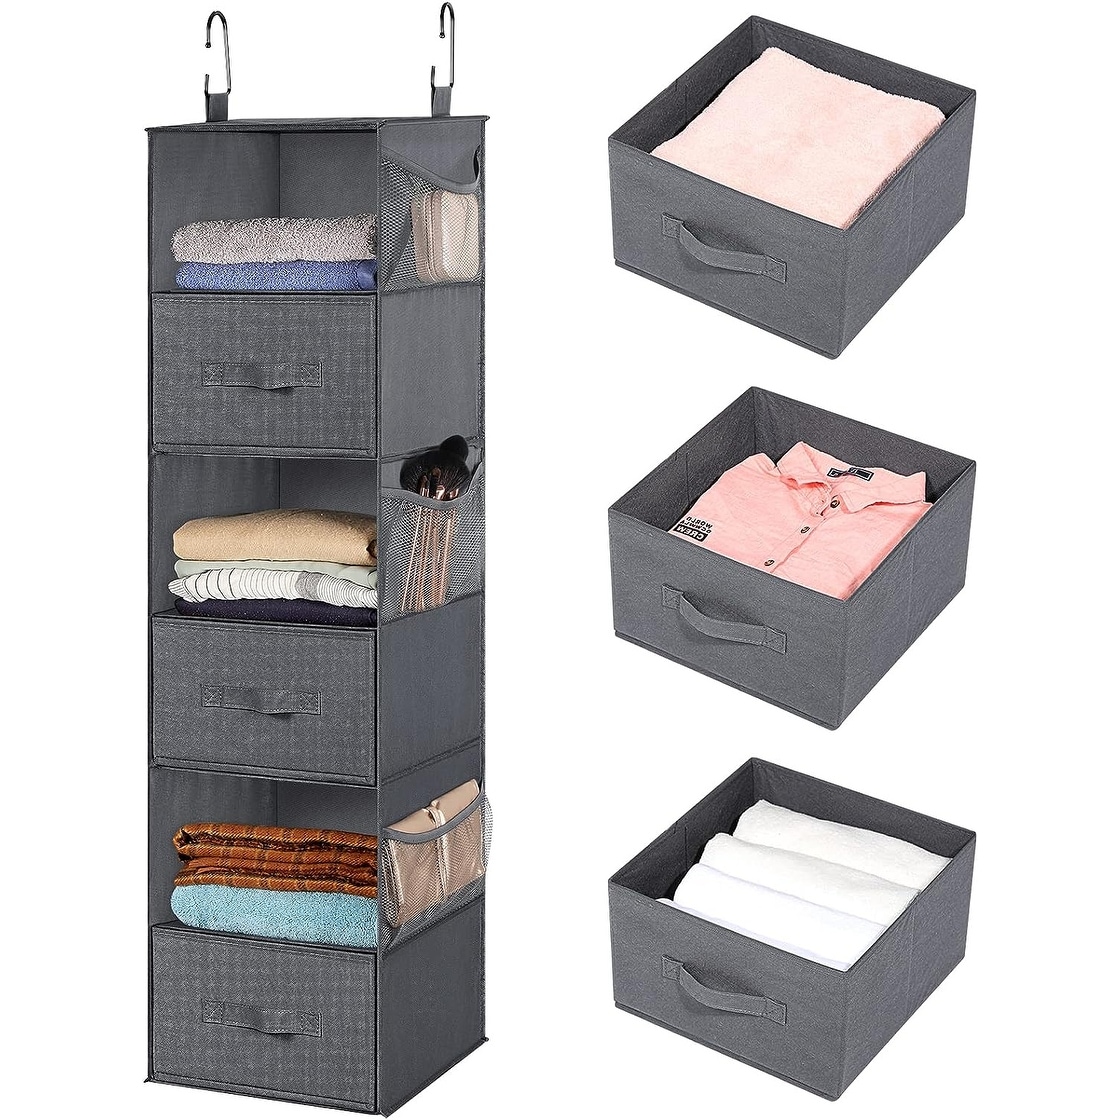 https://ak1.ostkcdn.com/images/products/is/images/direct/bd2c780ca1d8993c33feb7ce36f38483880f57d8/Hanging-Closet-Organizer---6-Shelf-Hanging-Storage-Shelves-with-3-Drawers-%26-Side-Pocket.jpg